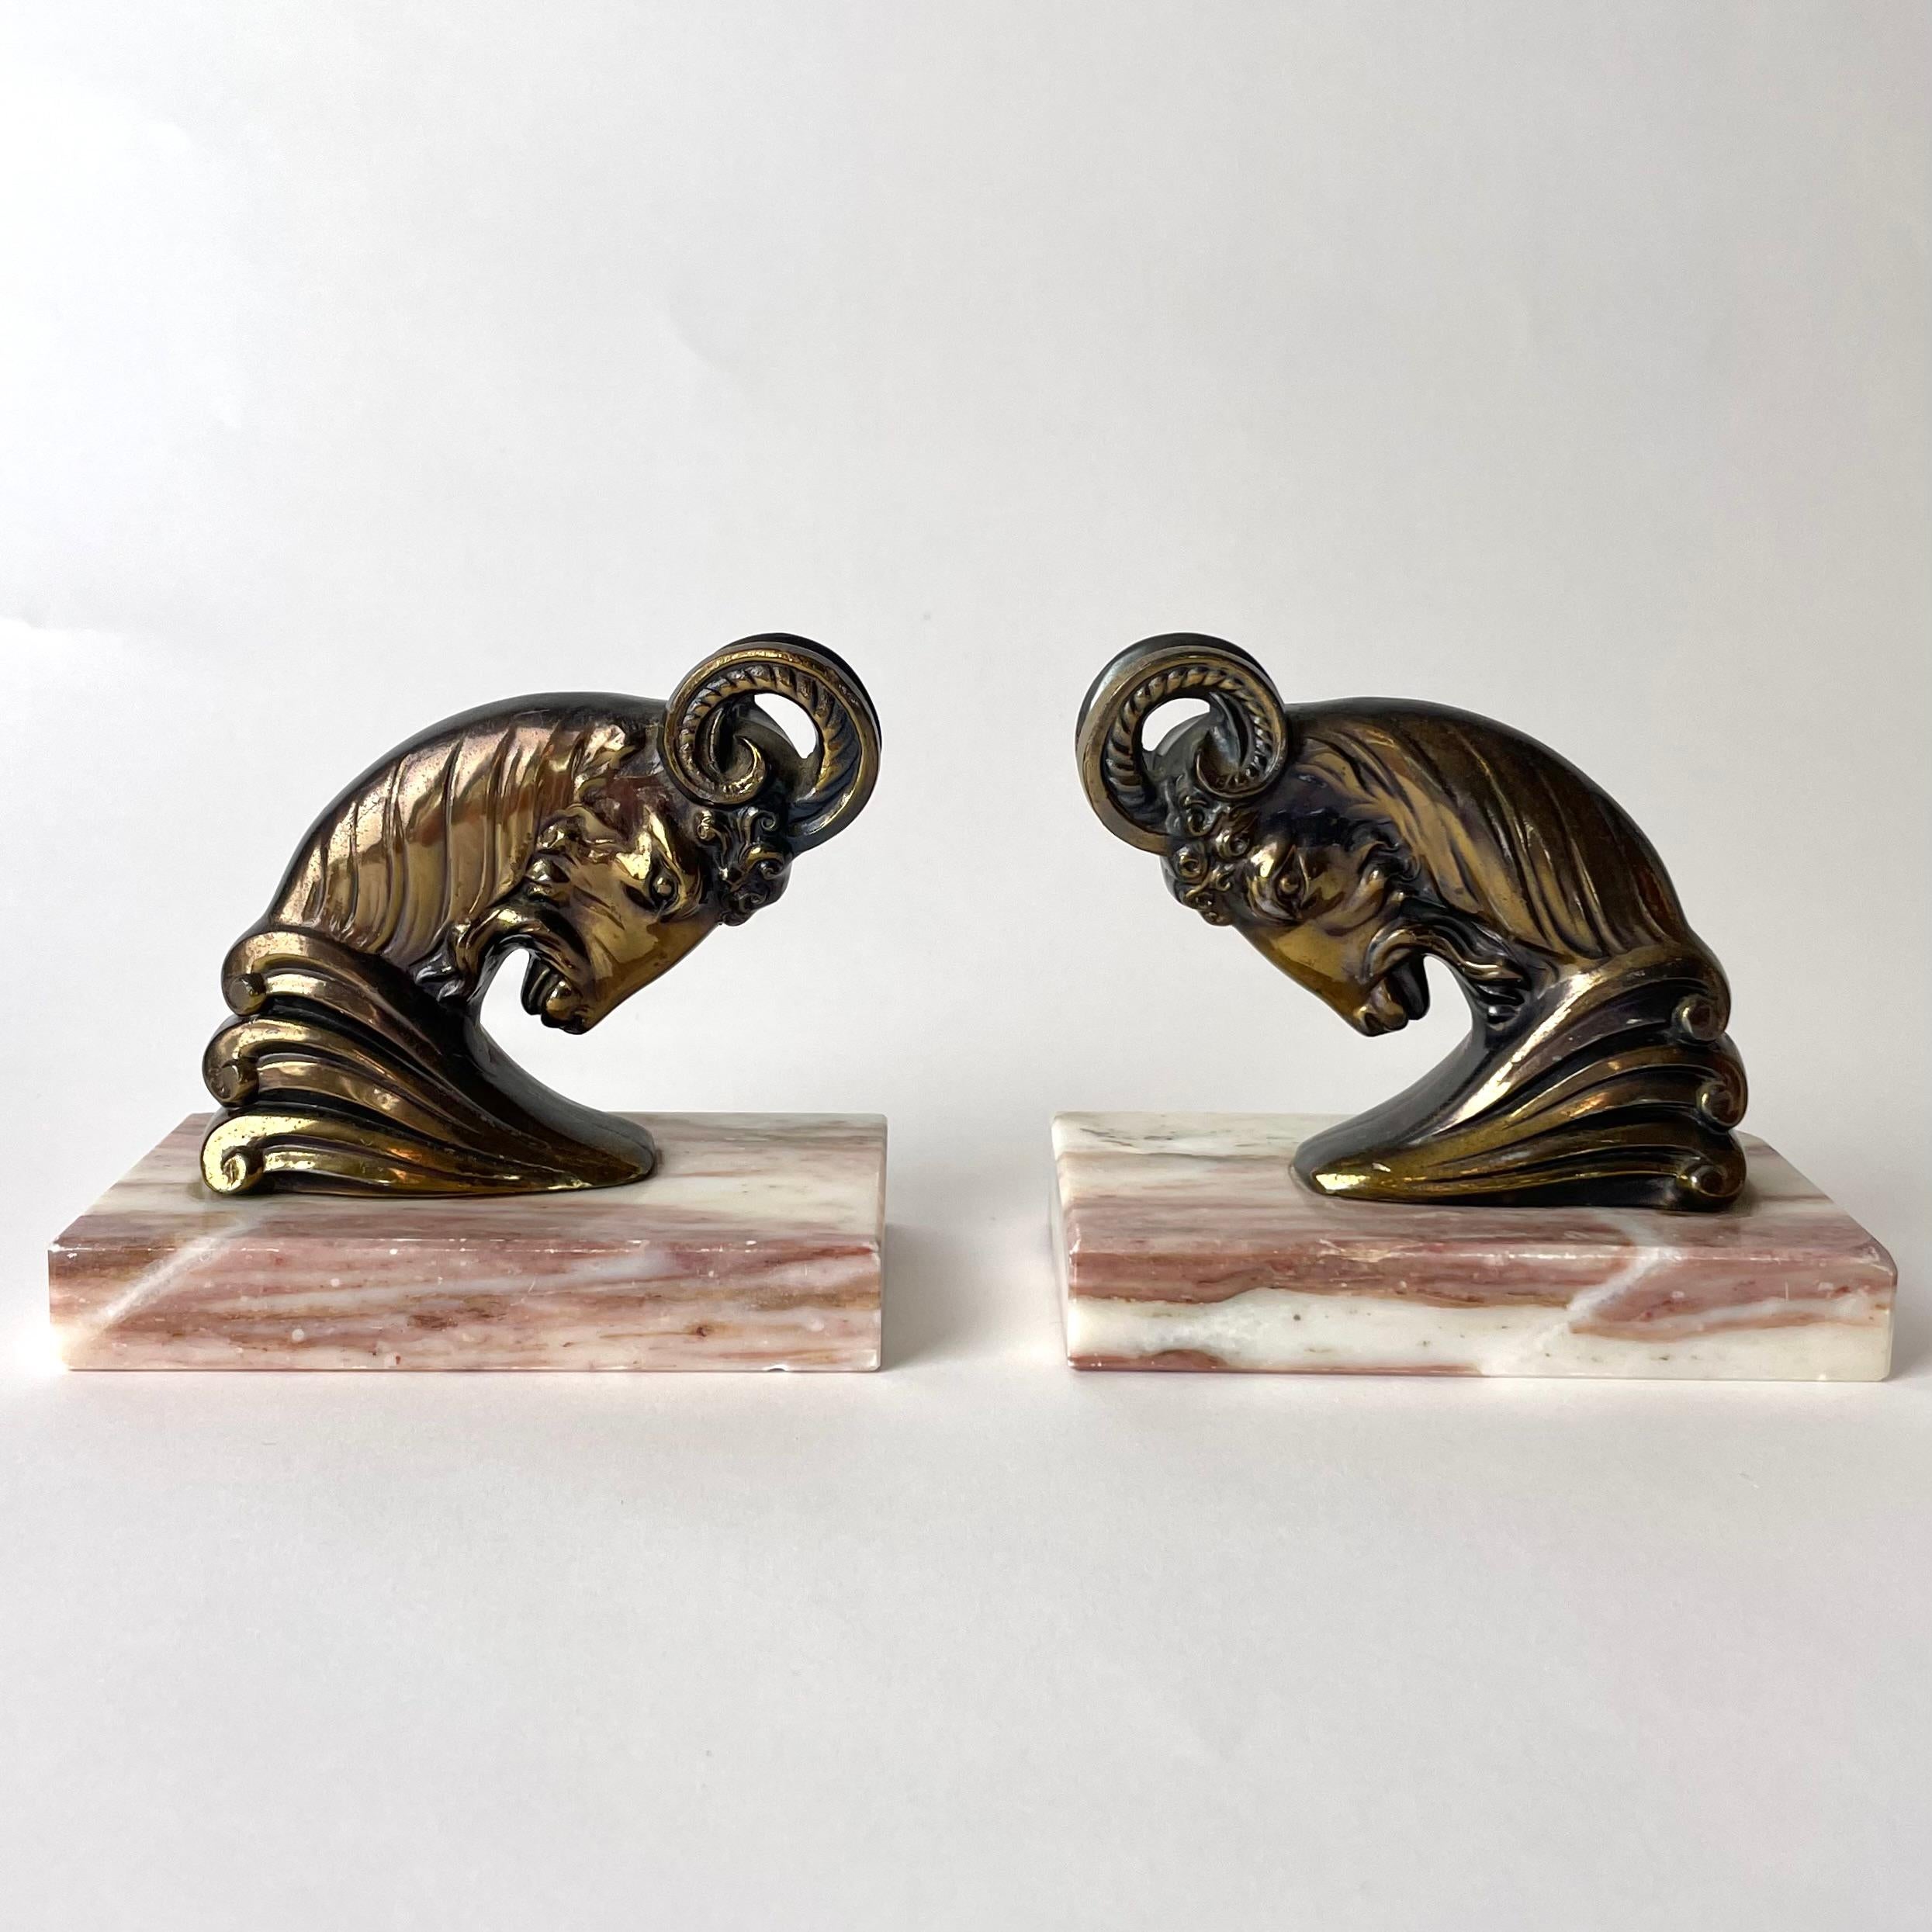 A Pair of powerful Art Deco Bookends from the 1930s with very period designed rams. Made in patinated metal with marble bases.

Wear consistent with age and use 